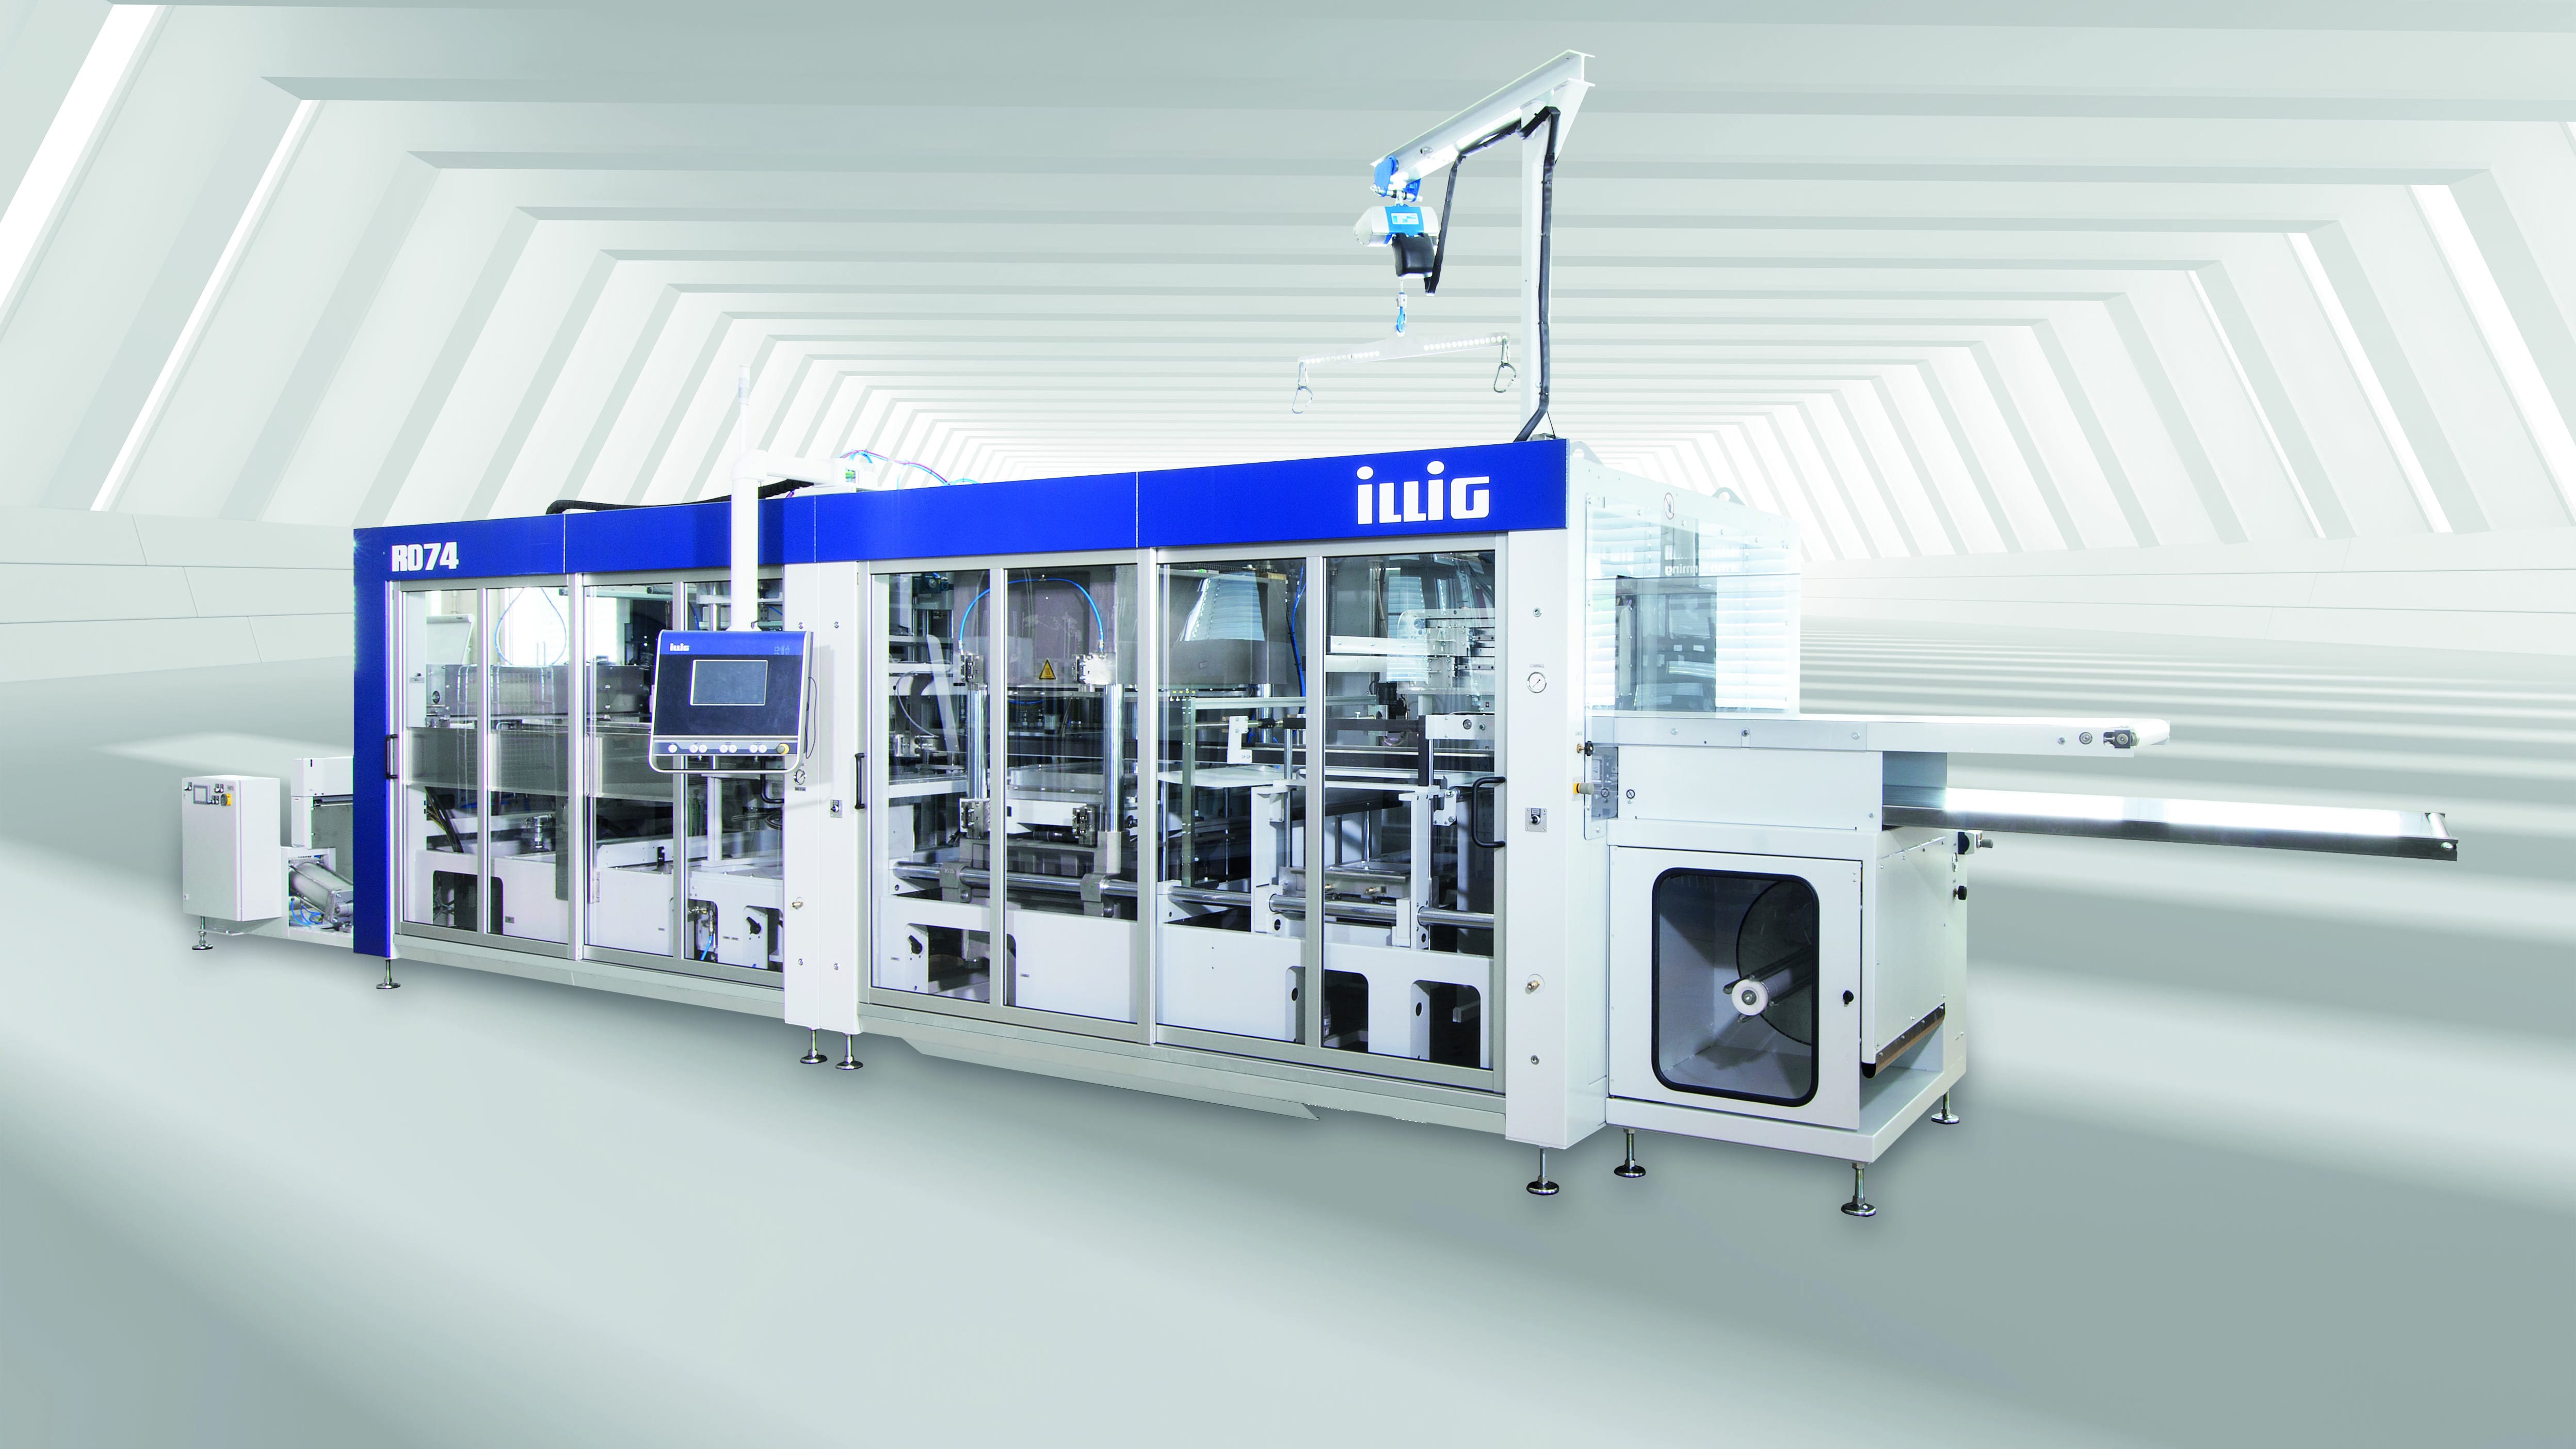 The new ILLIG thermoforming machine RD74d